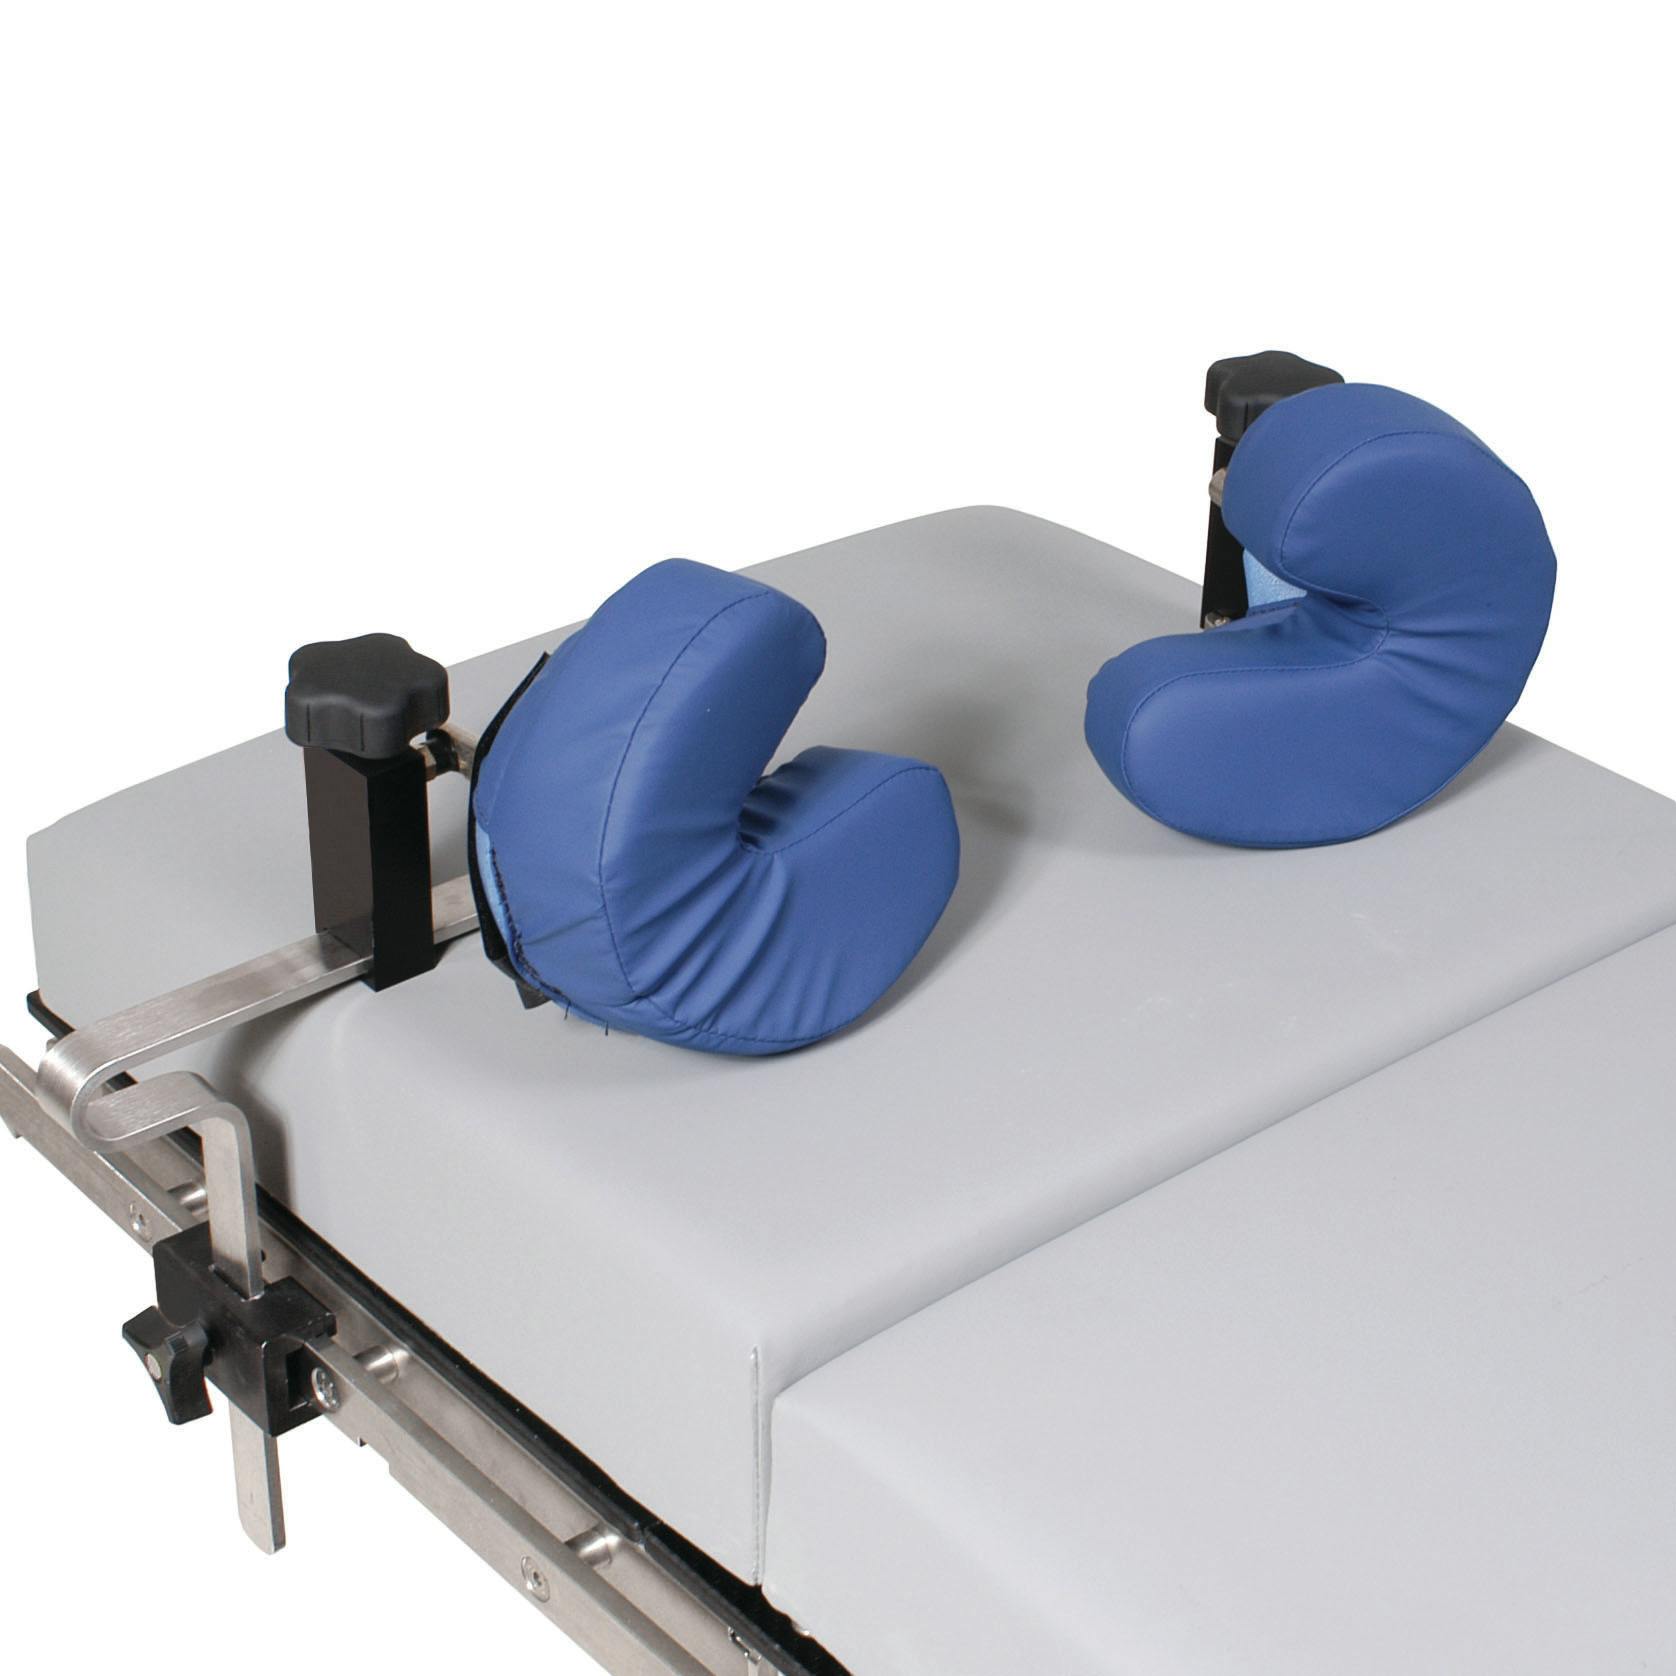 Shoulder Supports - includes Two Shoulder Supports - Fitted Pads